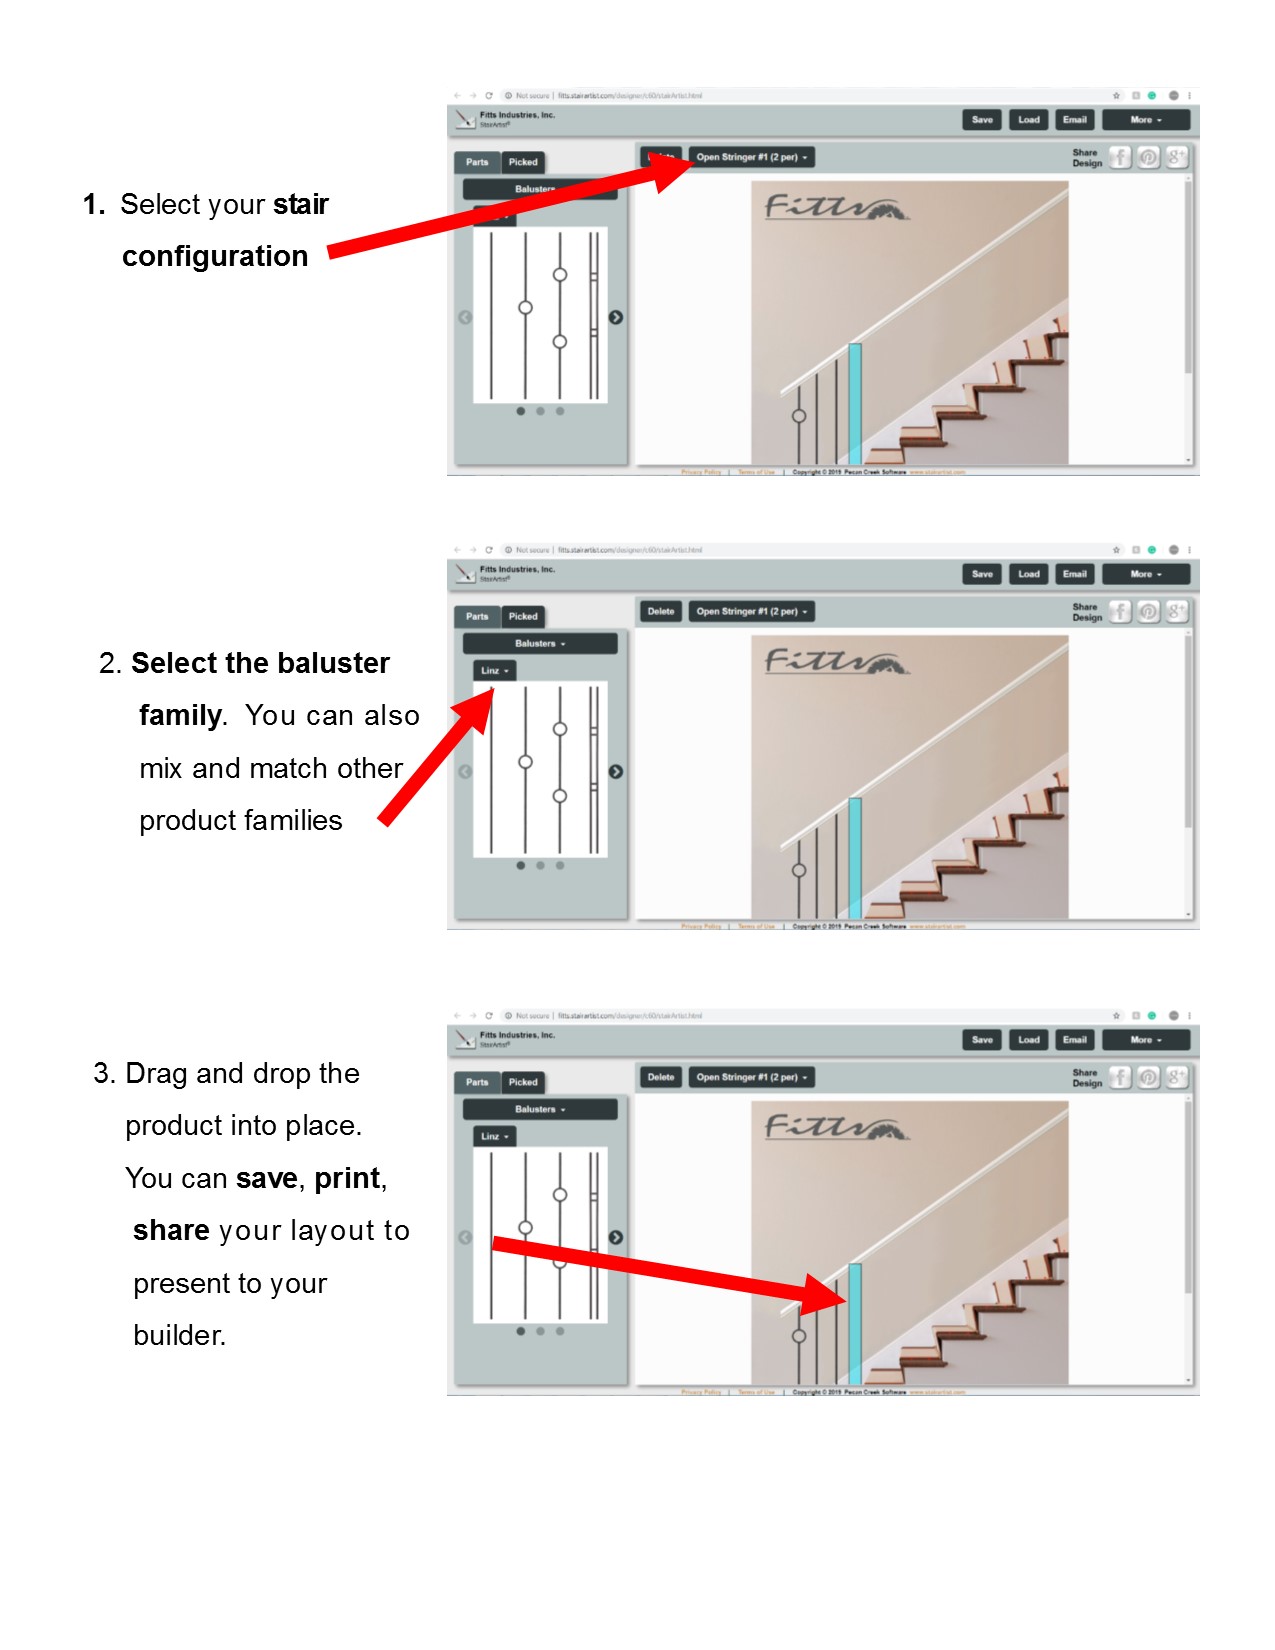 Fitting Stairs & Stair Parts, Stair Guides